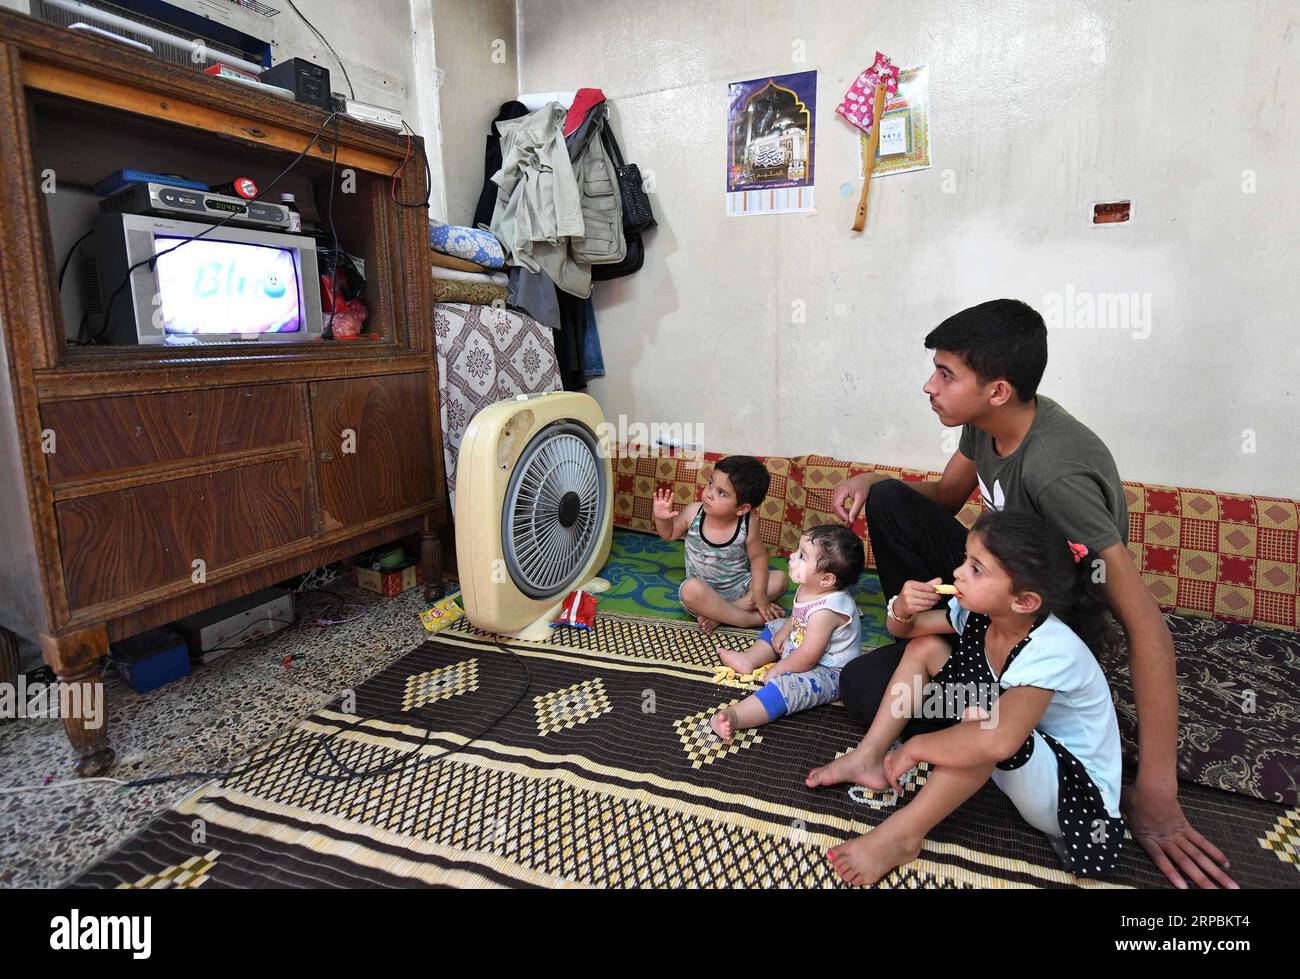 (190611) -- HOMS, June 11, 2019 -- Children of Kamal Shtaiwi watch TV in their house in the Wadi al-Sayeh street in the central city of Homs, Syria, May 29, 2019. Kamal Shtaiwi, 58, enjoys returning to his home with his wife and four children, even though it is surrounded by the destruction of war. TO GO WITH Feature: Displaced Syrian family back home, sweet home amid rubble ) SYRIA-HOMS-DISPLACED SYRIAN FAMILY-HOME AmmarxSafarjalani PUBLICATIONxNOTxINxCHN Stock Photo